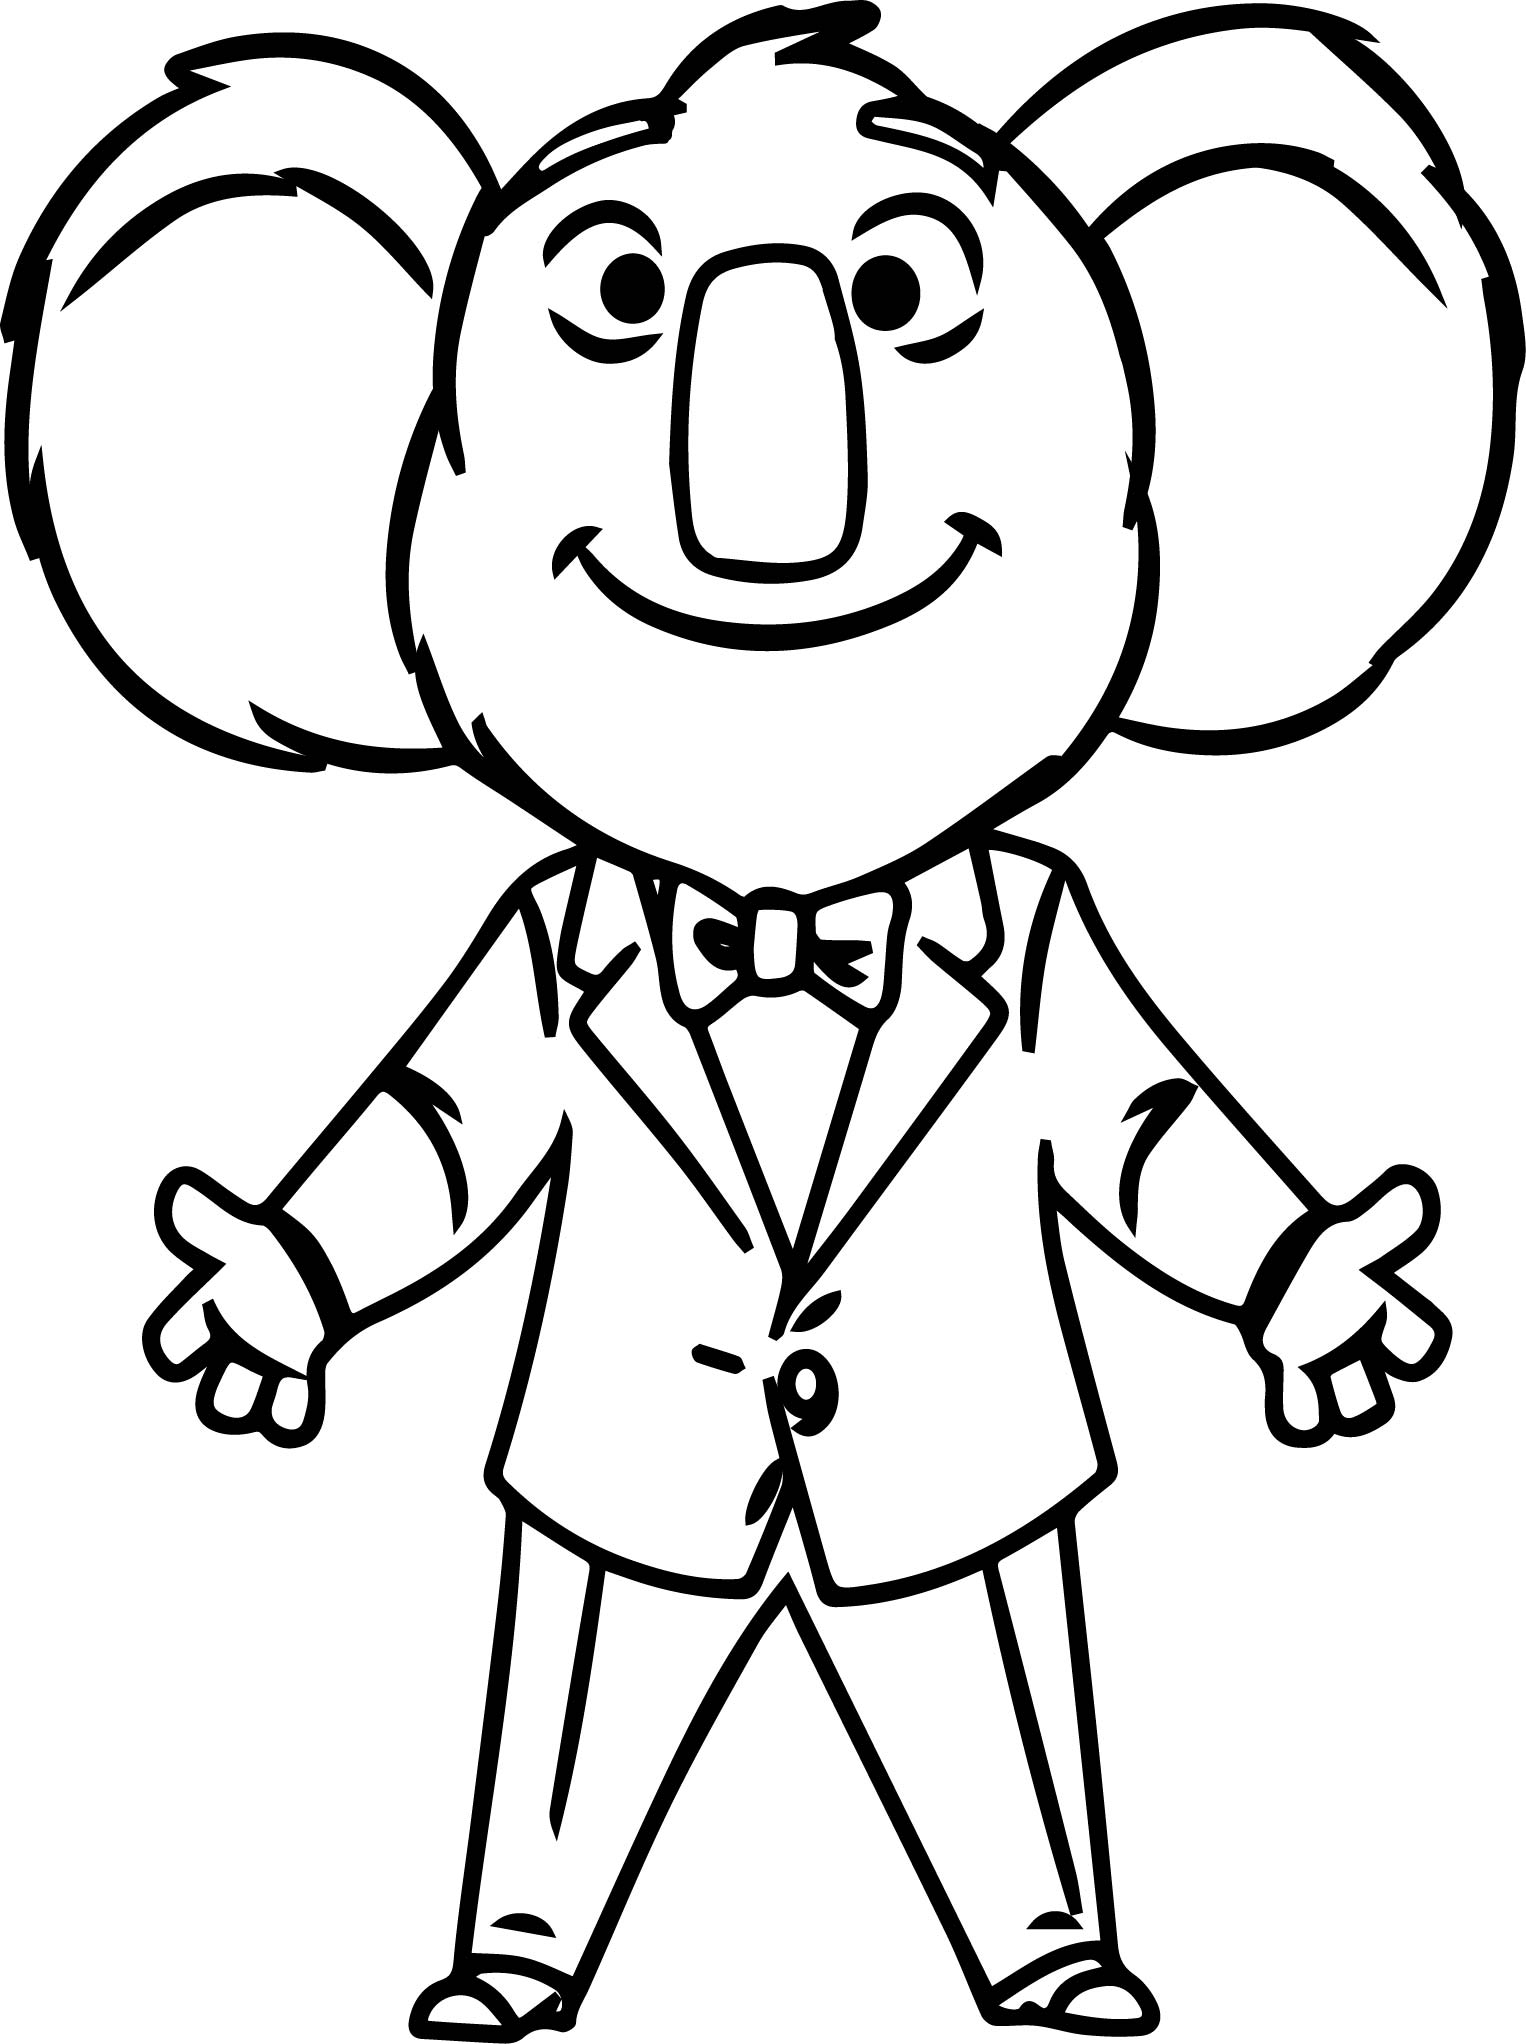 Creative Image of Sing Movie Coloring Pages - albanysinsanity.com